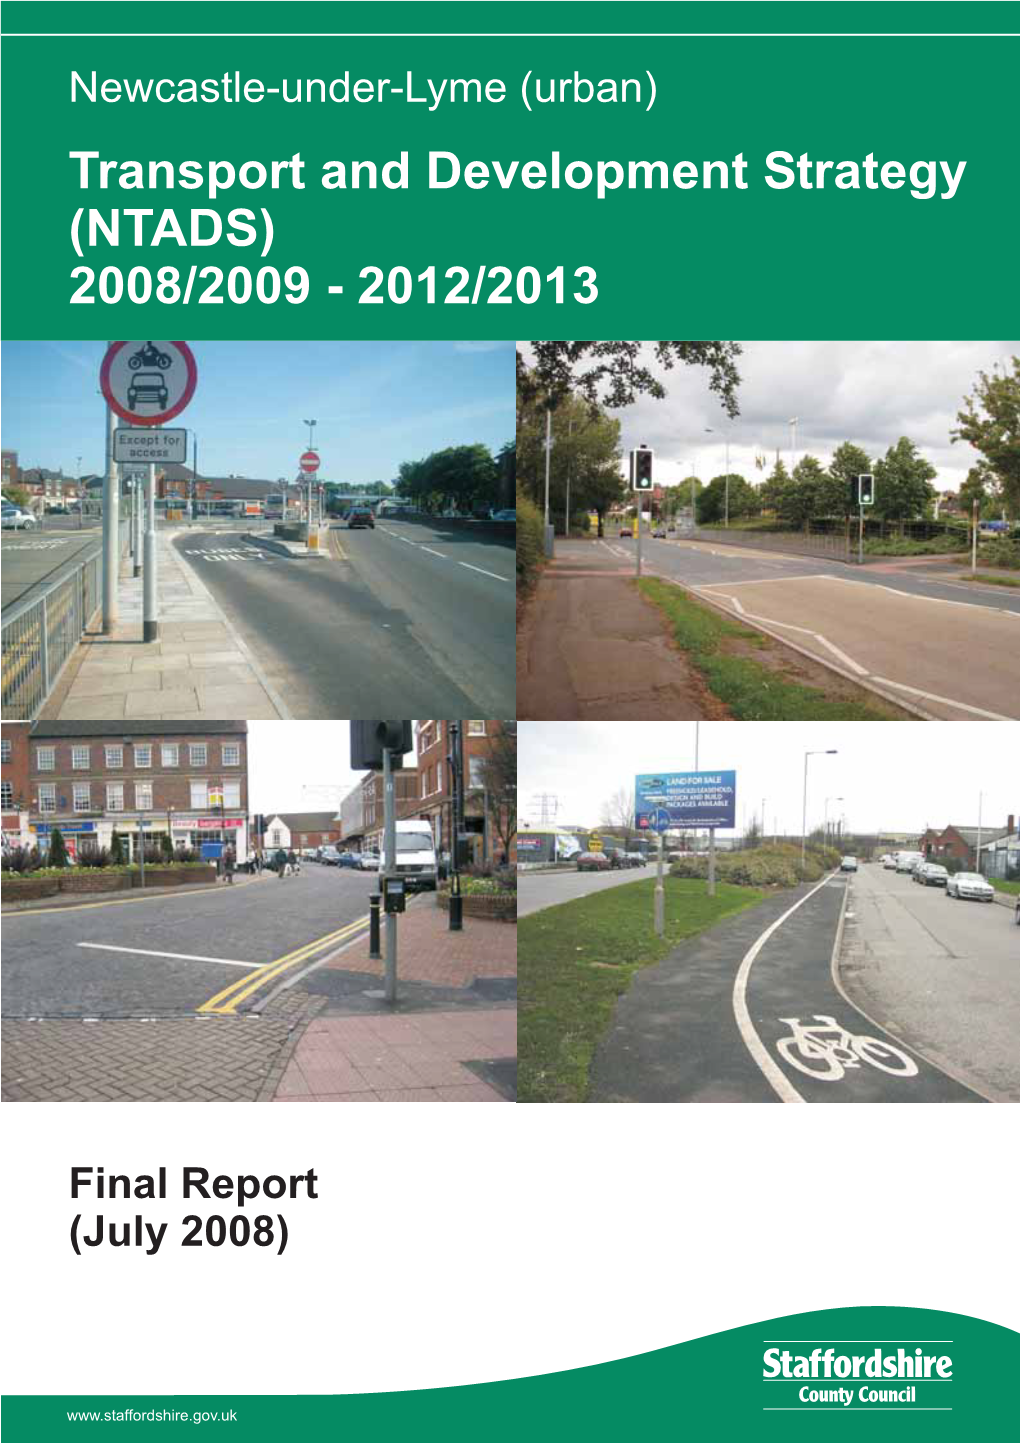 Transport and Development Strategy (NTADS) 2008/2009 - 2012/2013